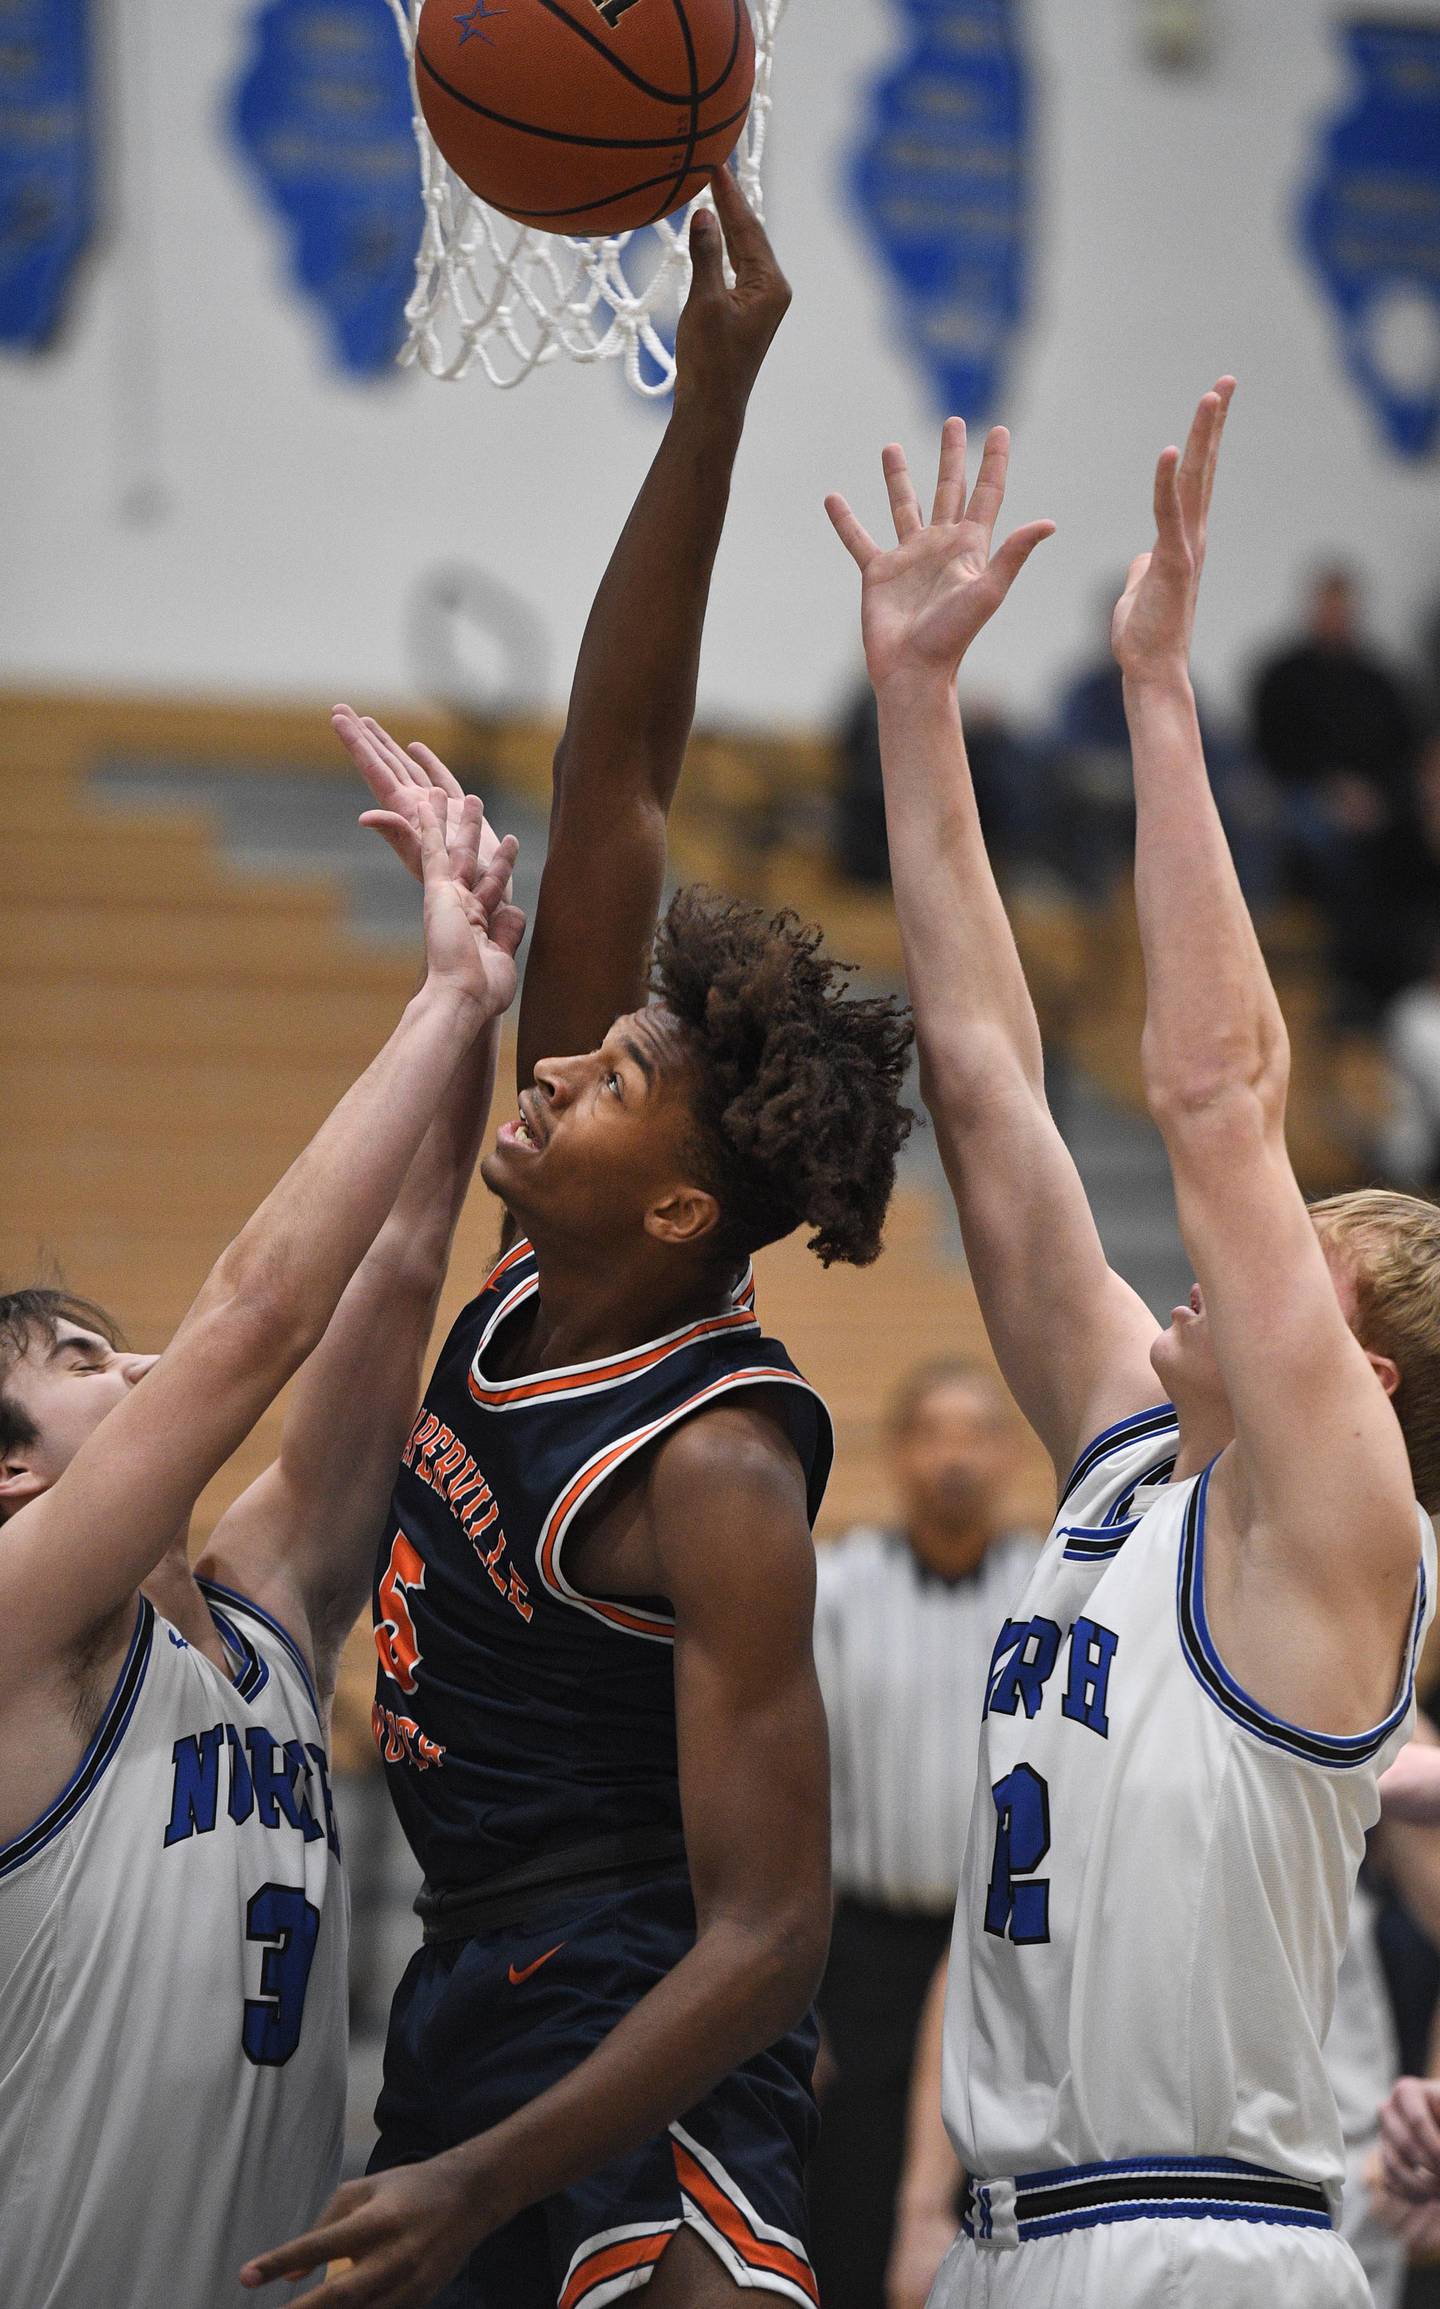 St. Charles North’s Cameron Ring and Parker Reinke, right, sandwich Naperville North’s Luke Williams as he tries to shoot in a boys basketball game in St. Charles on Wednesday, January 18, 2023.